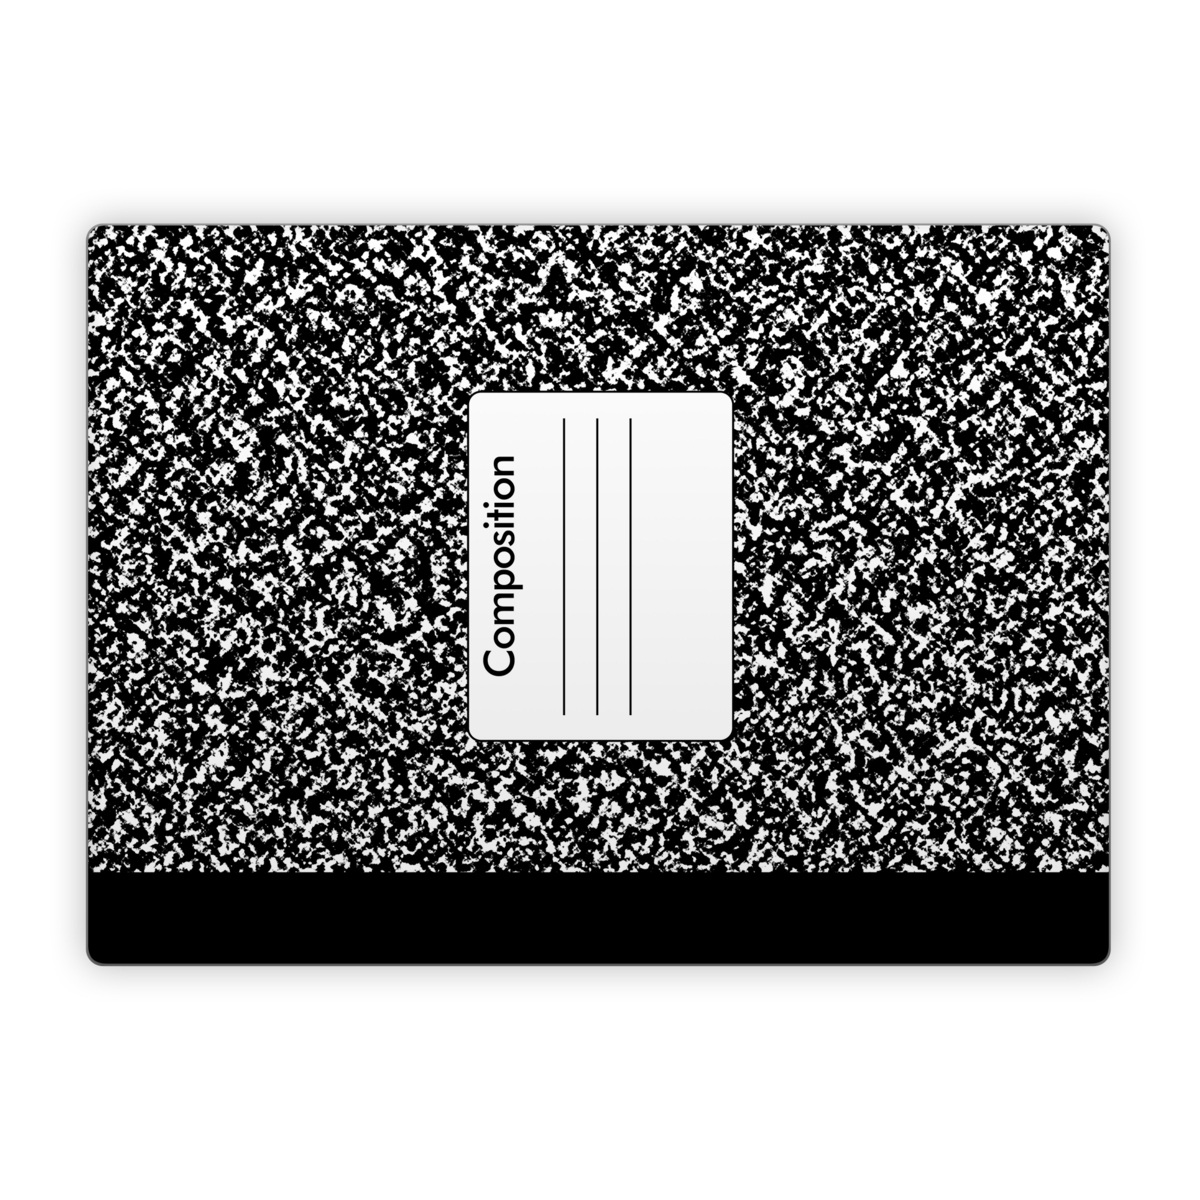 Microsoft Surface Laptop Series Skin design of Text, Font, Line, Pattern, Black-and-white, Illustration, with black, gray, white colors